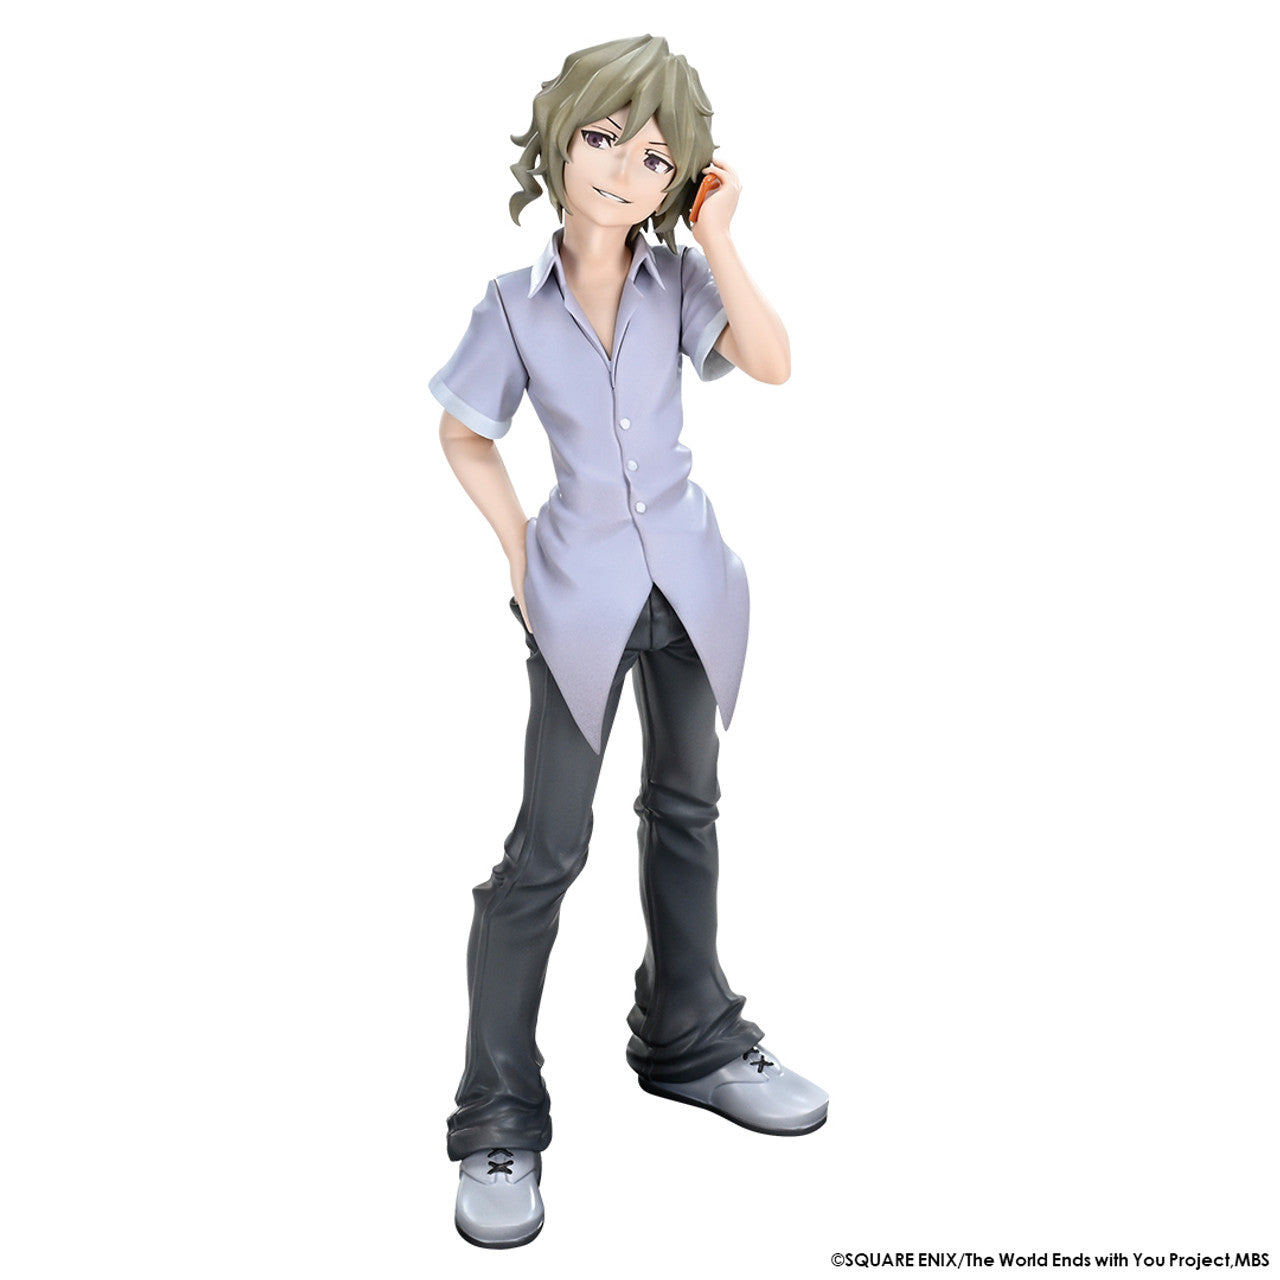 THE WORLD ENDS WITH YOU THE ANIMATION FIGURE - JOSHUA